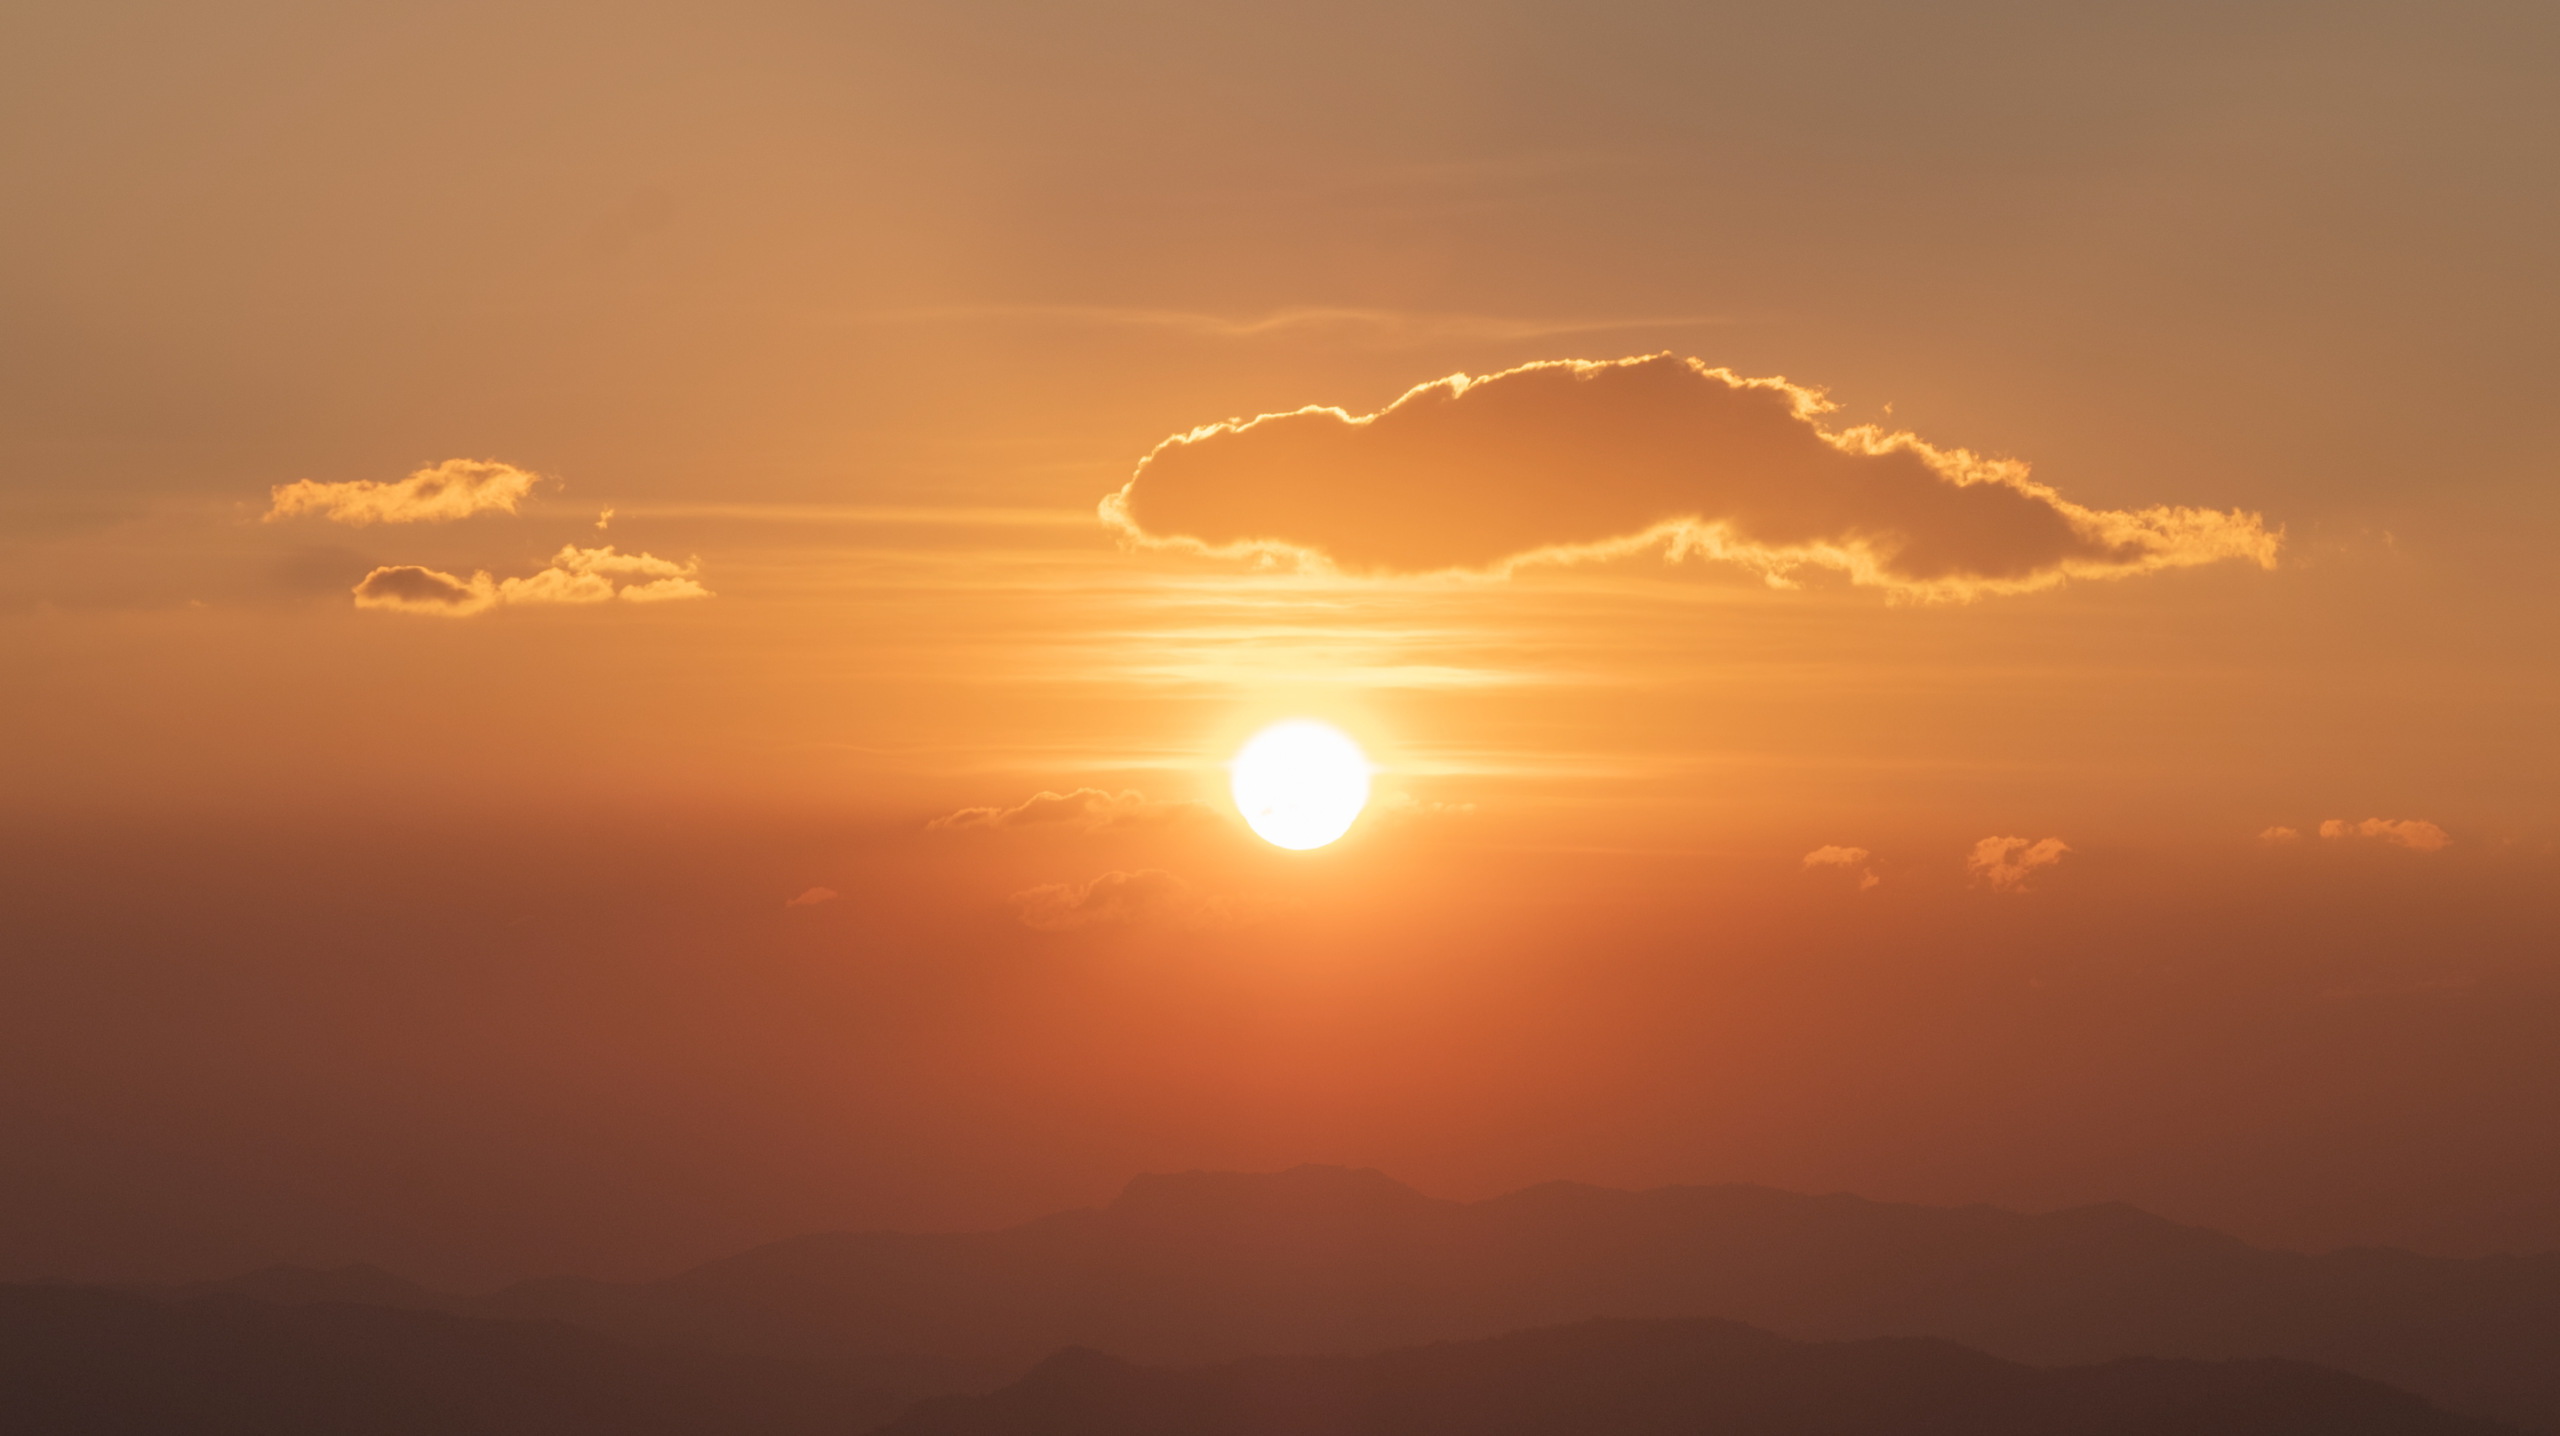 Screenshot of a stock footage item. The screenshot shows an orange sky with a few clouds and a bright sun mid-sunrise.